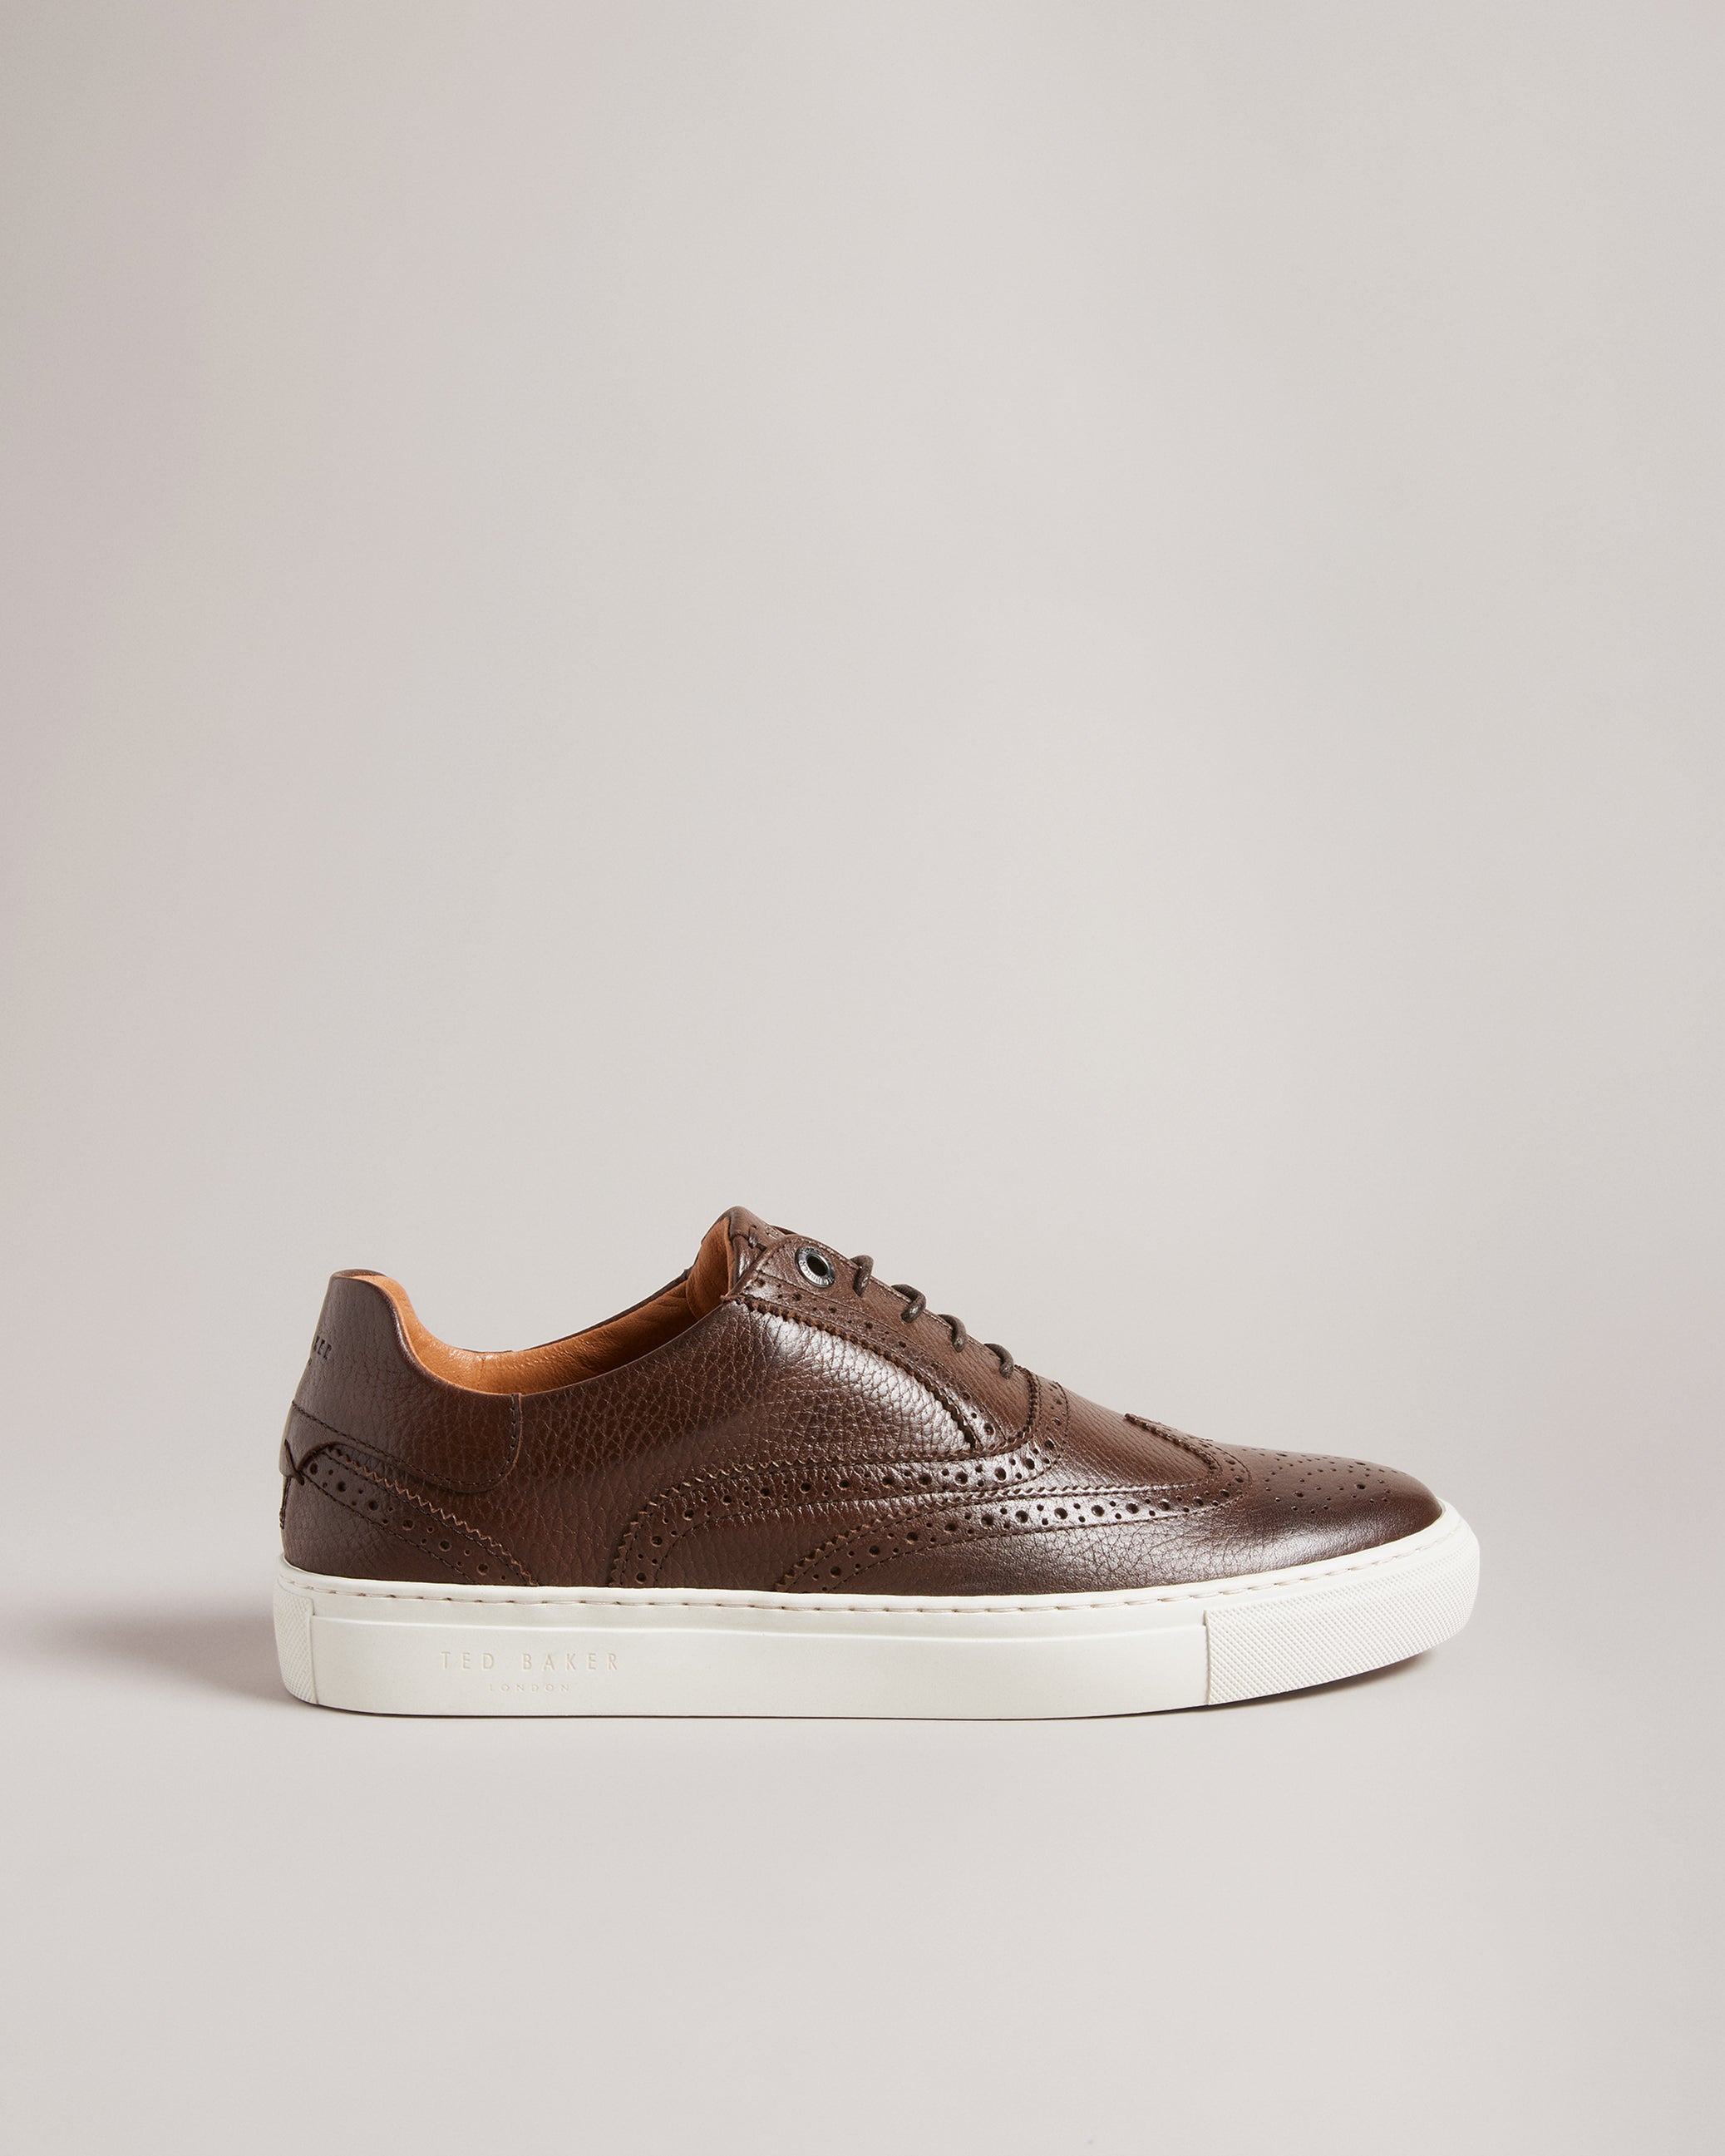 Men's Shoes – Ted Baker, United States